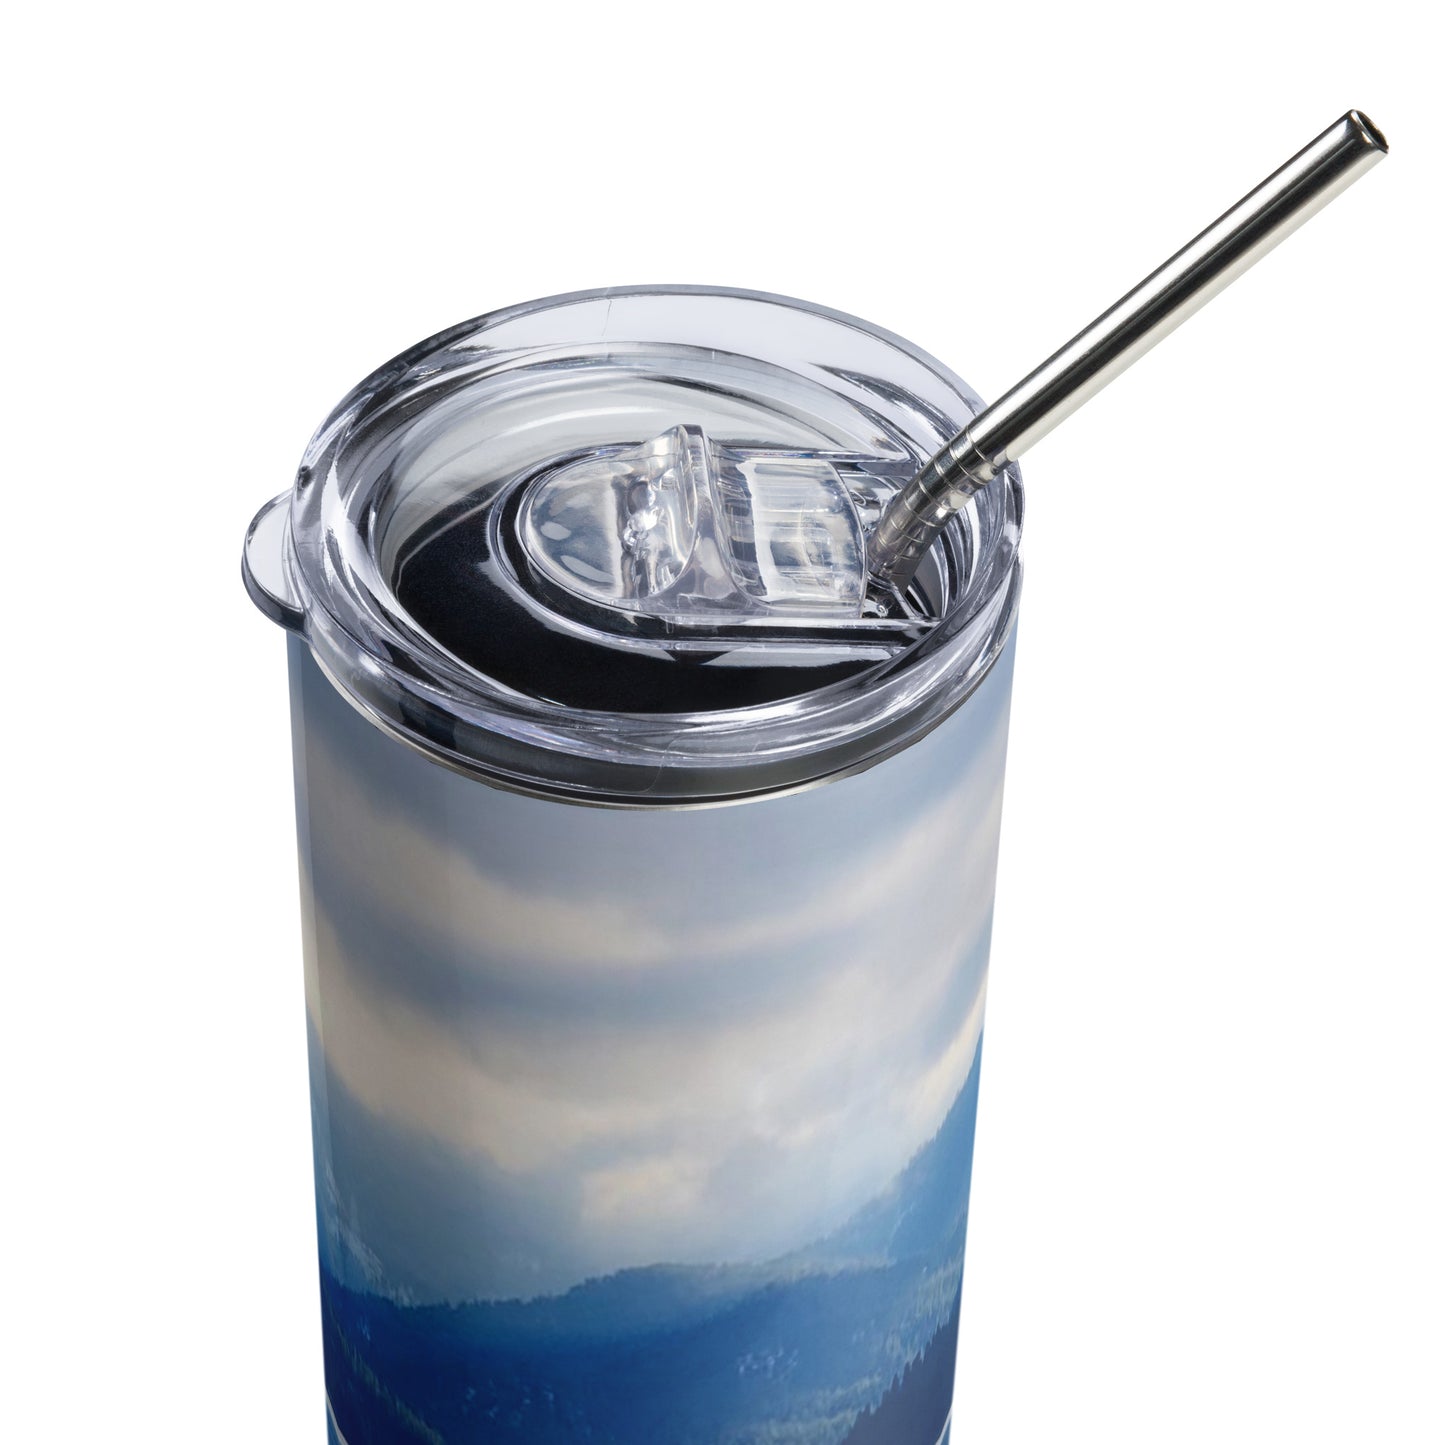 Stainless steel tumbler | Photo: The Calm